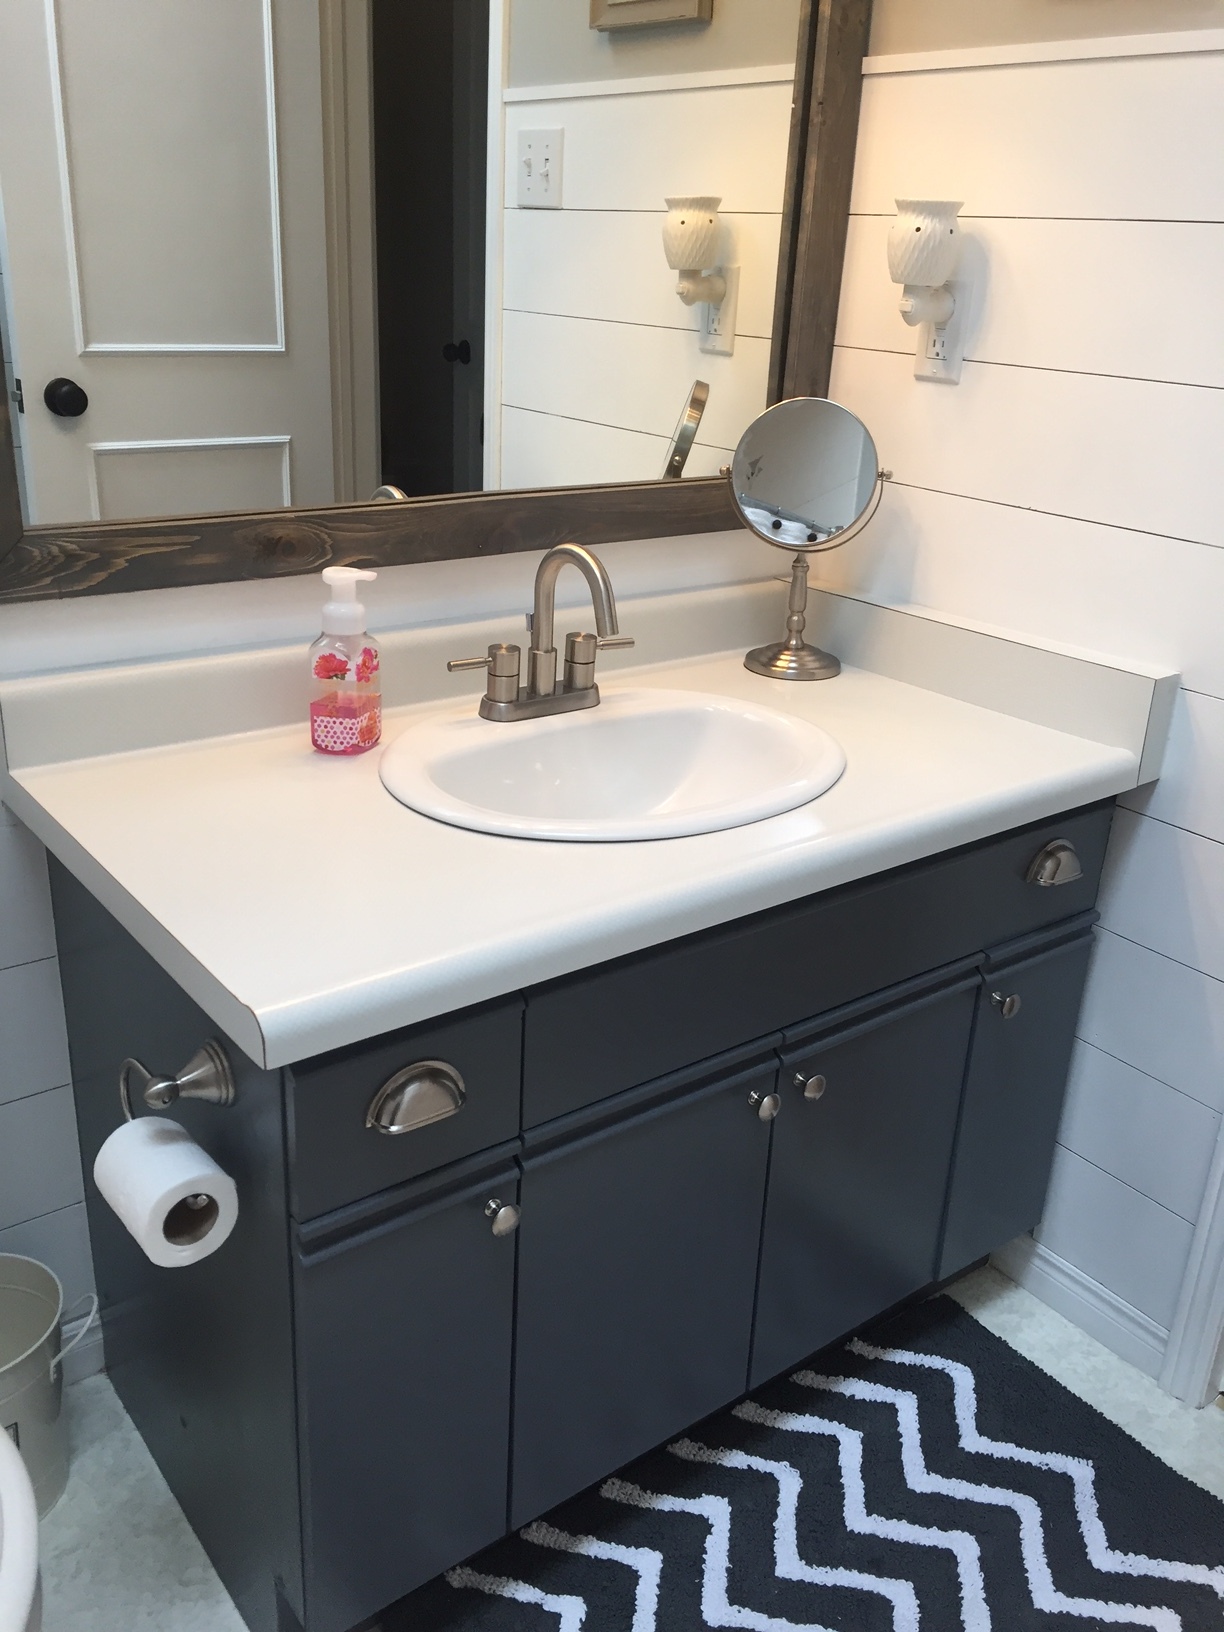 To Paint Laminate Cabinets, Can You Paint Laminate Vanity Cabinets